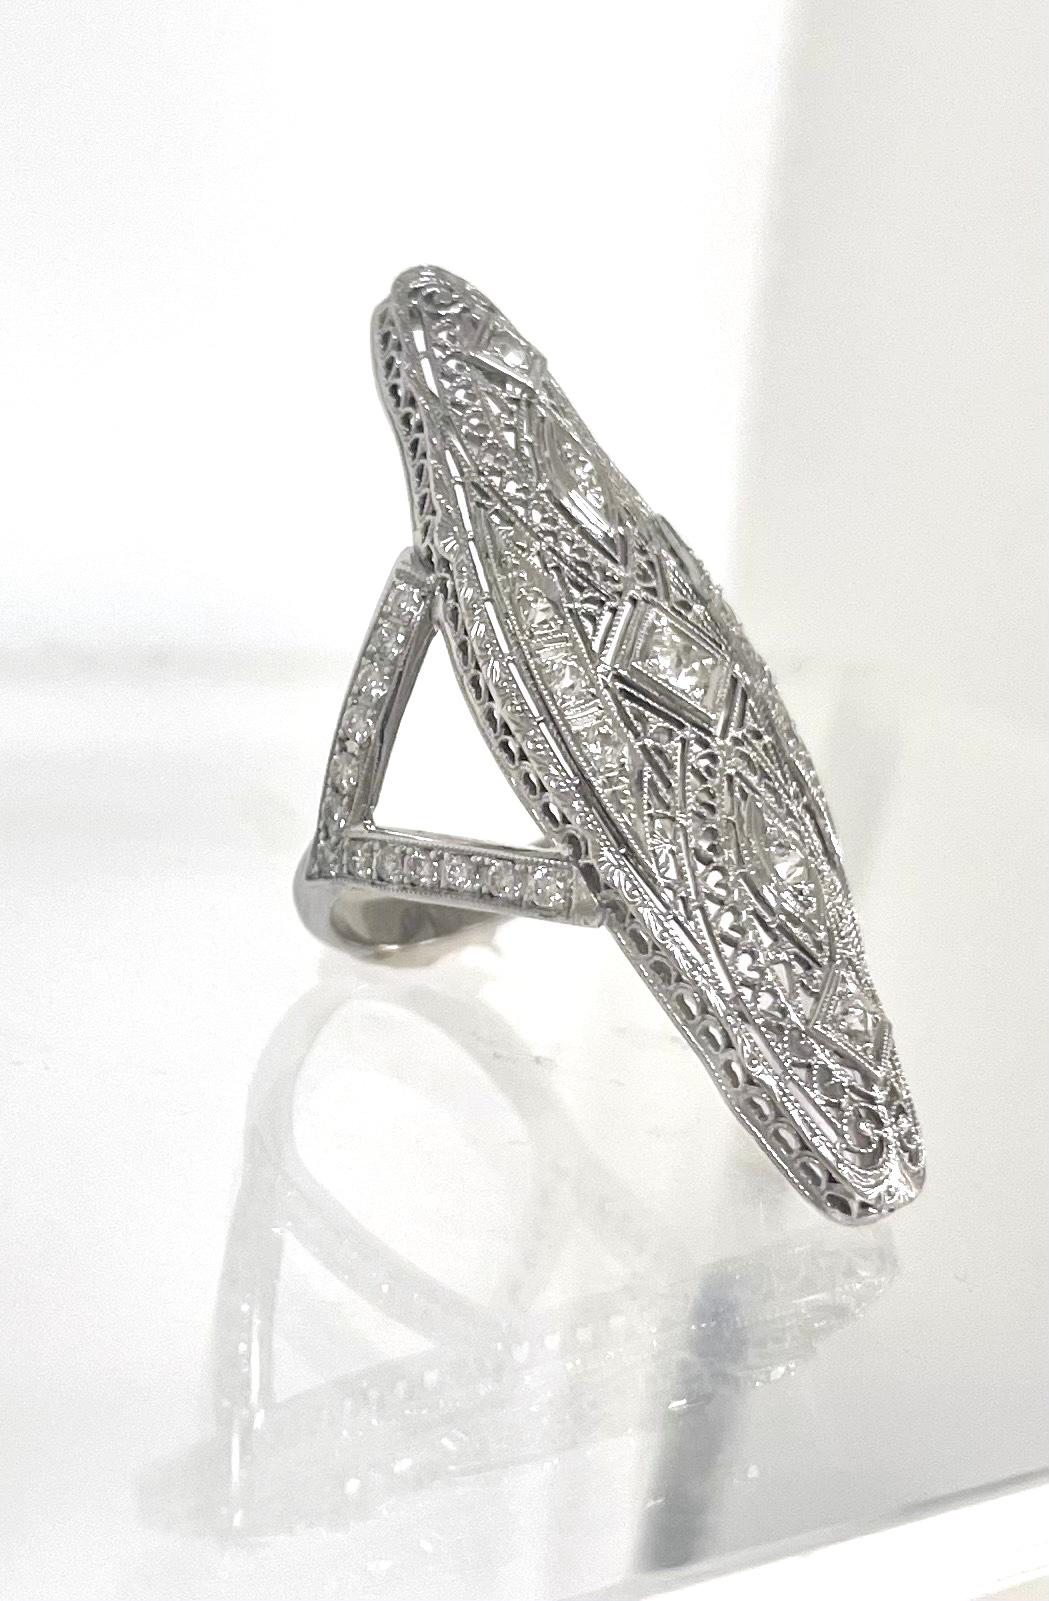 Description
A 1920’s Art Deco piece, born as a brooch and revamped to become this magnificent ring refashioned with a lovely Y-shaped pave diamond band.
Item #R126

Materials and Weight
Diamonds 1.60 carats,  45.5x16 mm marquise shape
14k white gold